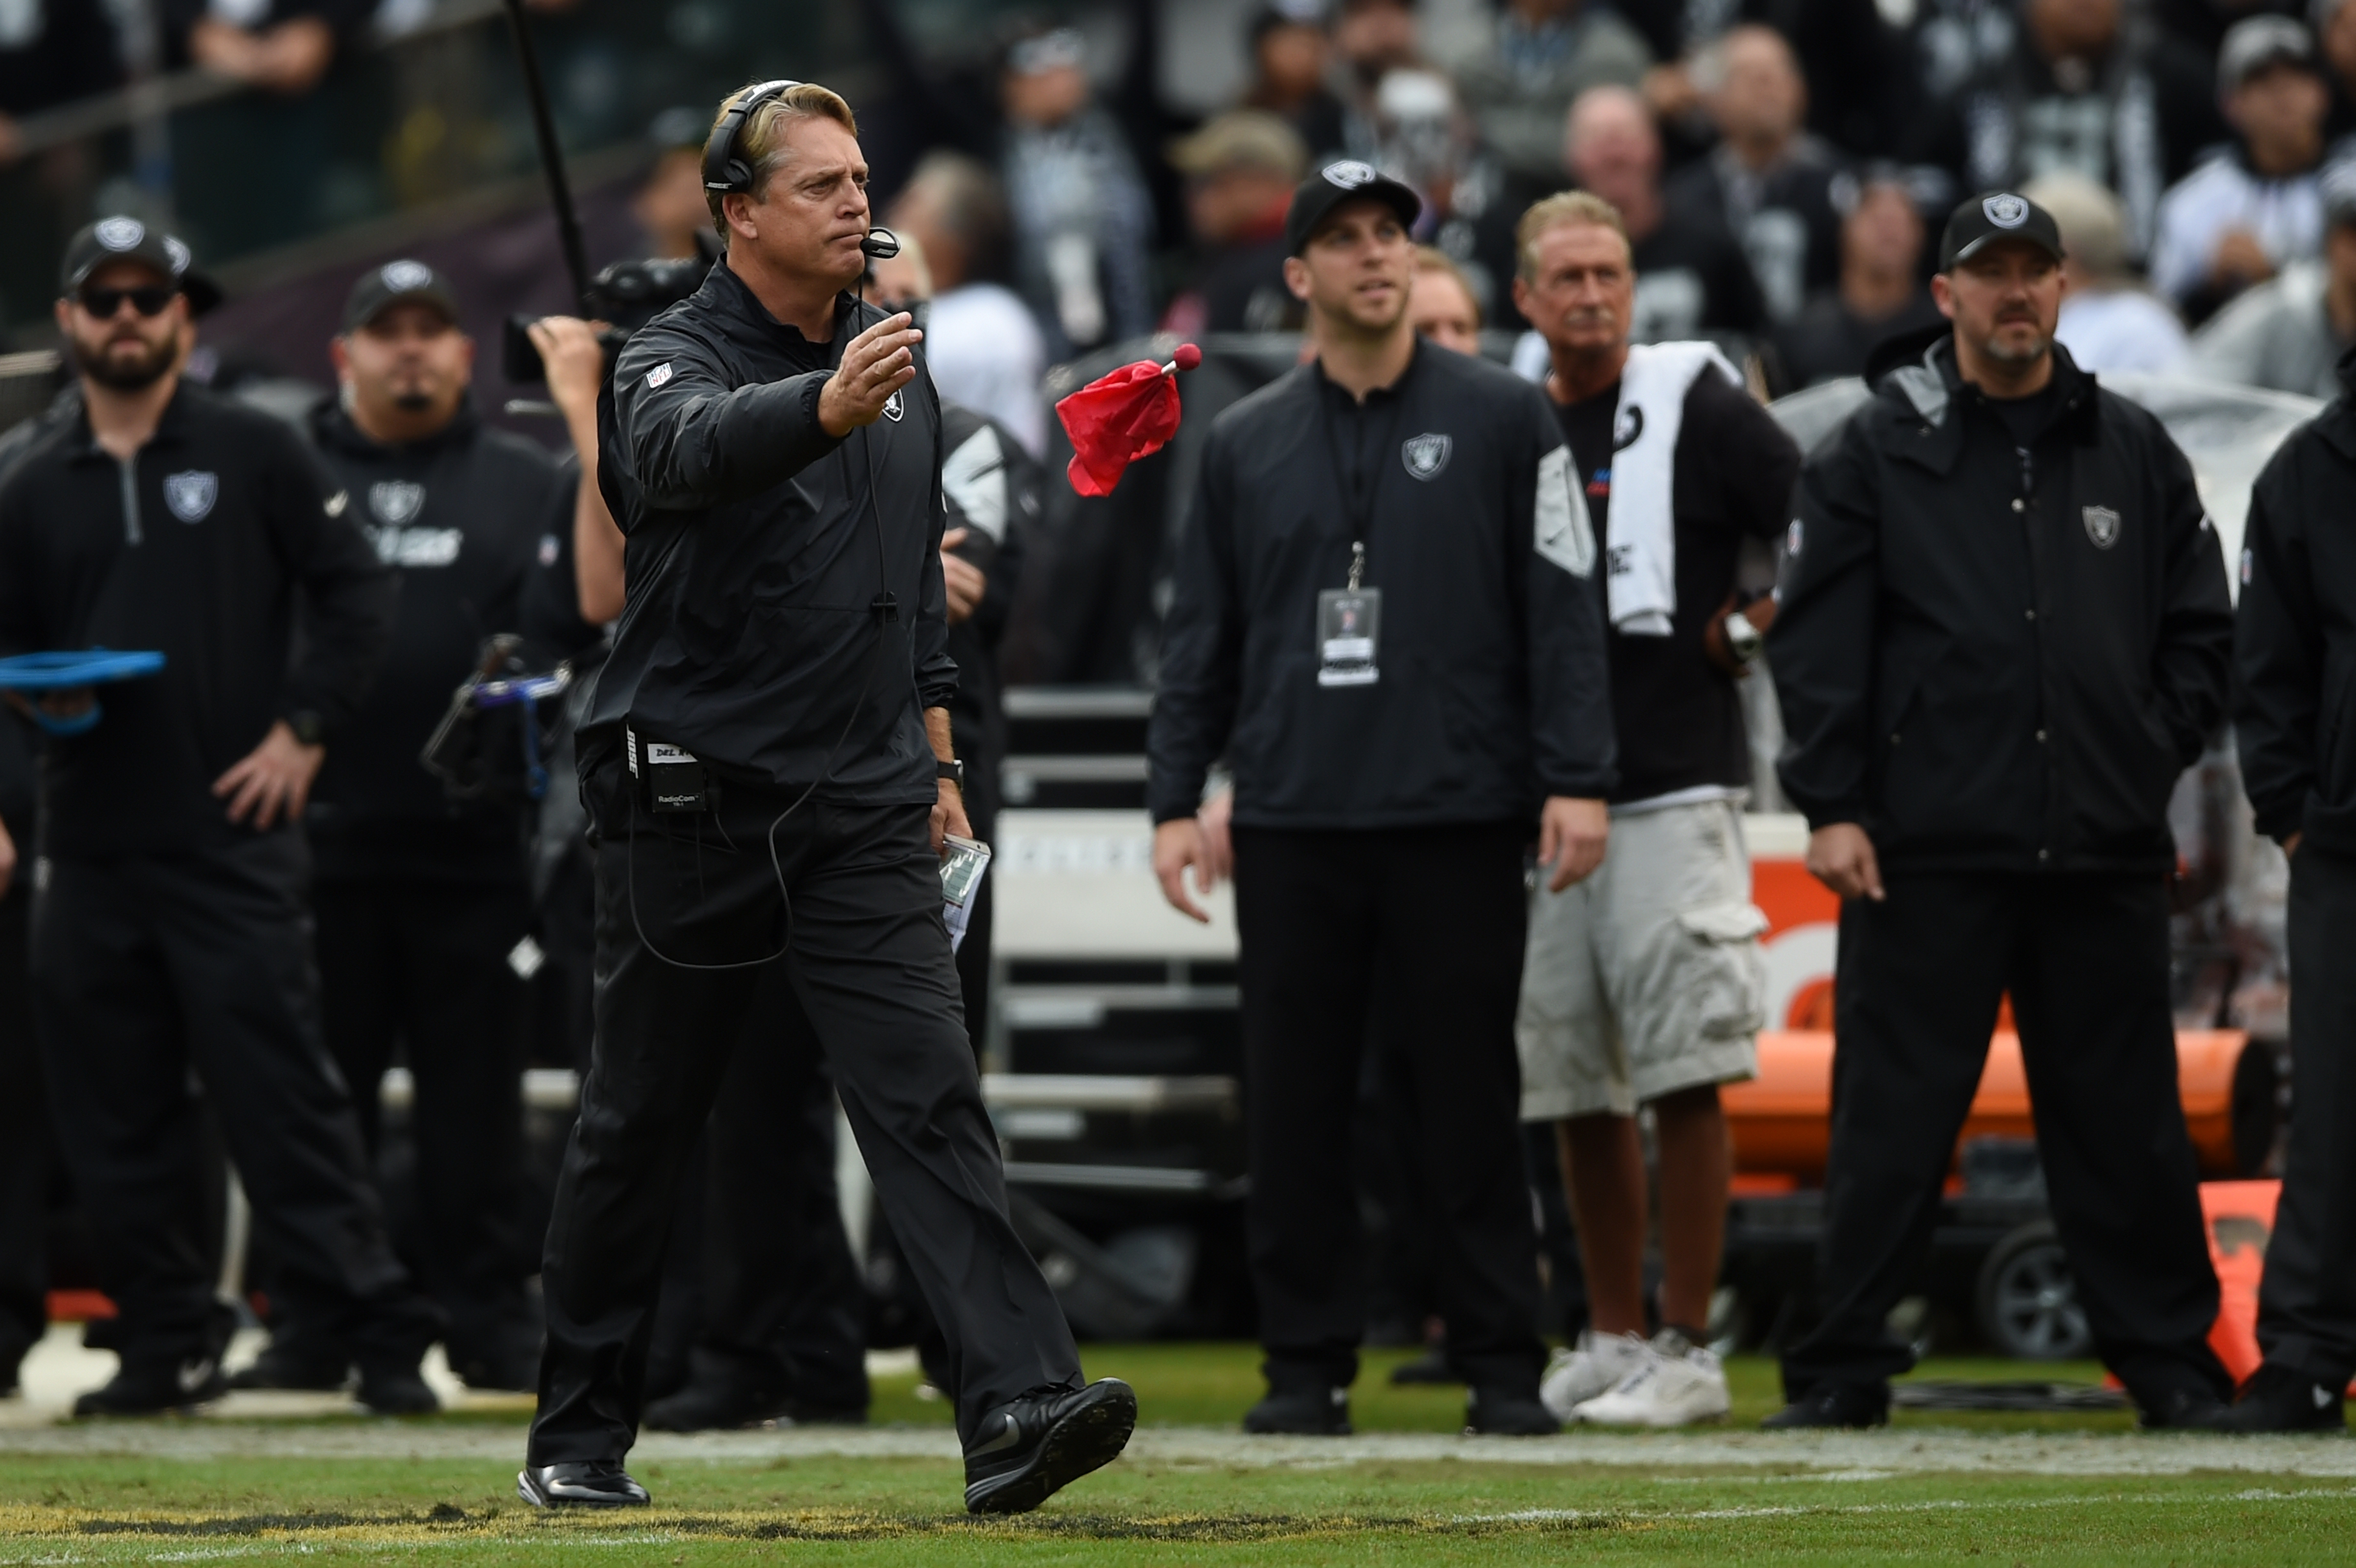 OAKLAND, CA - DECEMBER 06: Head coach Jack Del Rio of the Oakland Raiders throws his challenge flag after Latavius Murray #28 was called short of the goal line during their NFL game against the Kansas City Chiefs at O.co Coliseum on December 6, 2015 in Oakland, California. The ruling was overturned for an Oakland Raiders touchdown. 